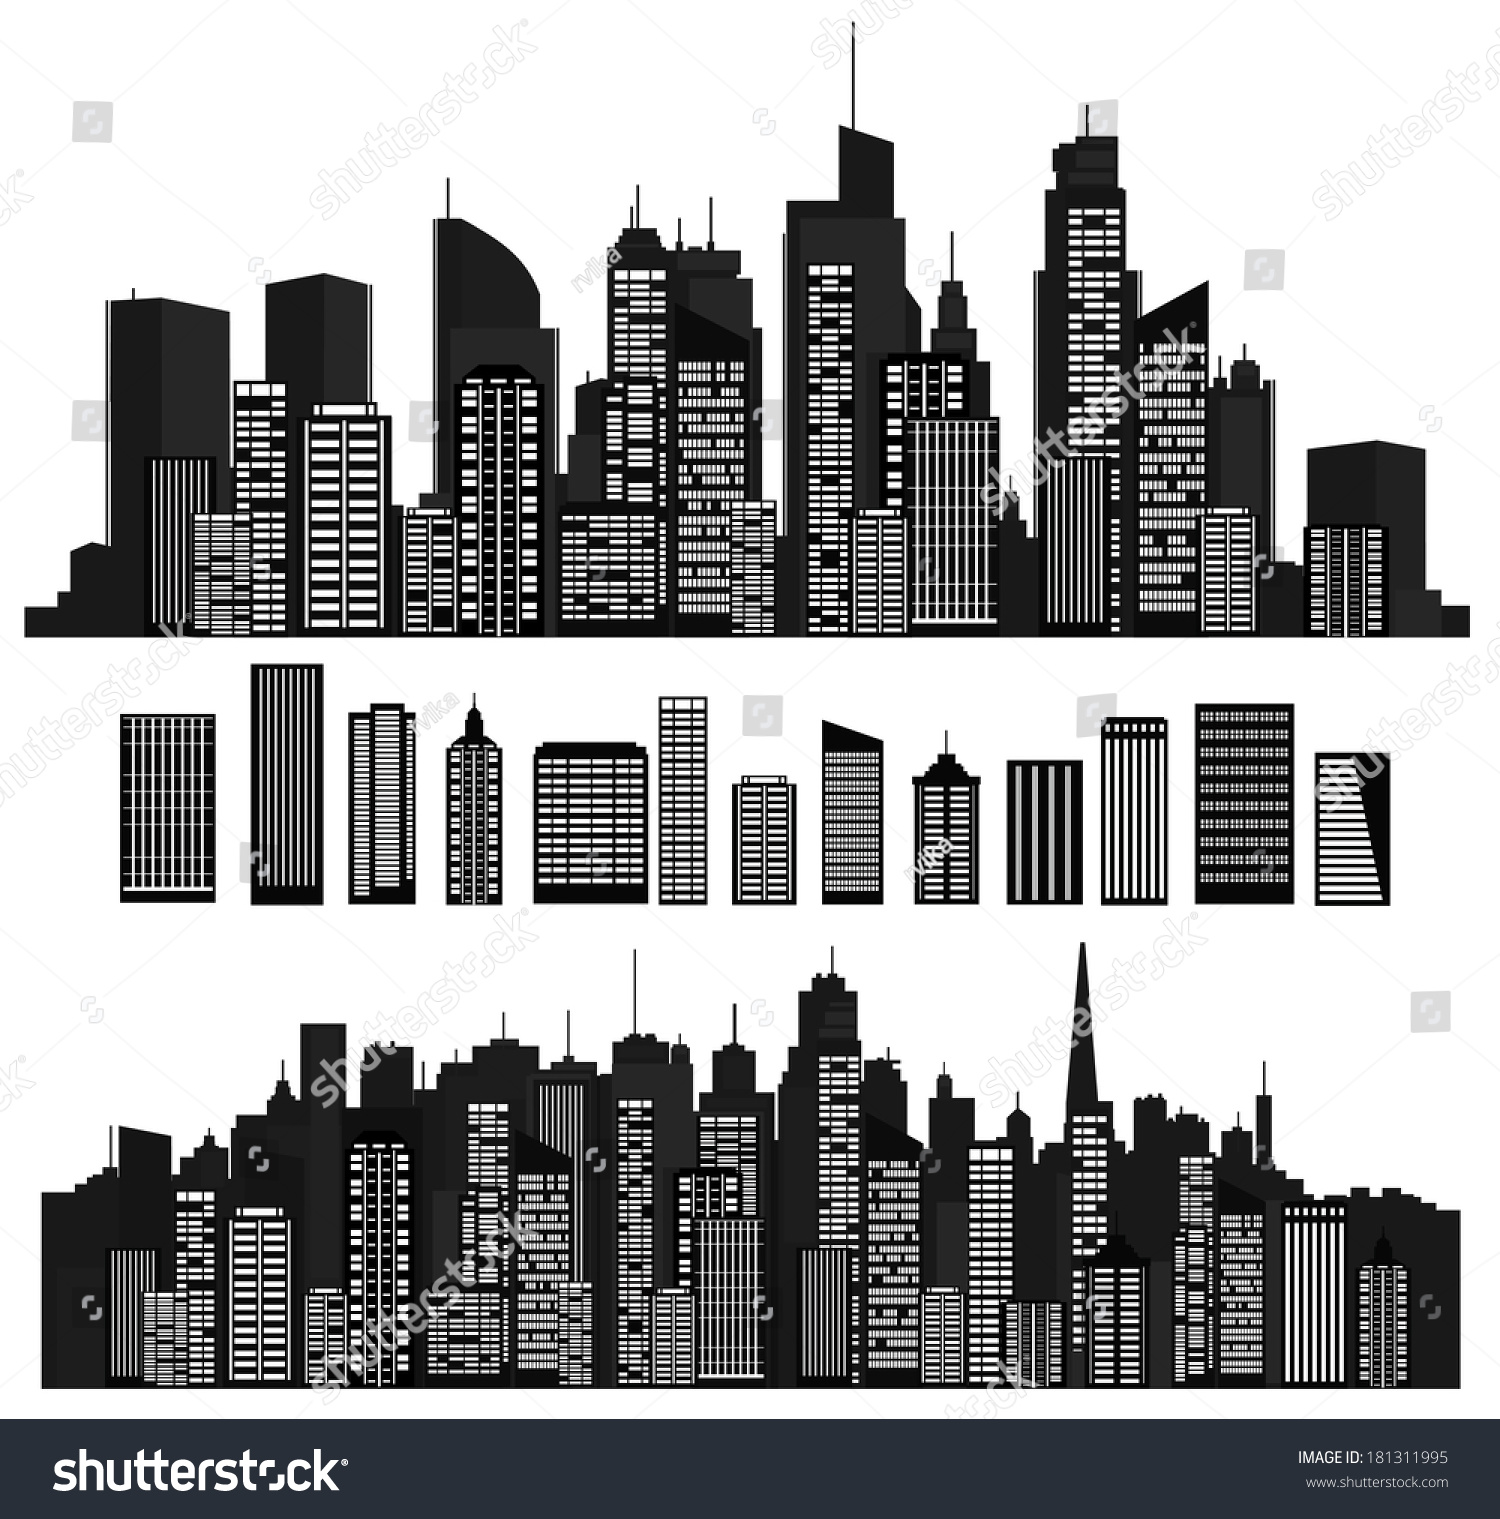 Vector Cities Silhouettes And Elements For Design. - 181311995 ...